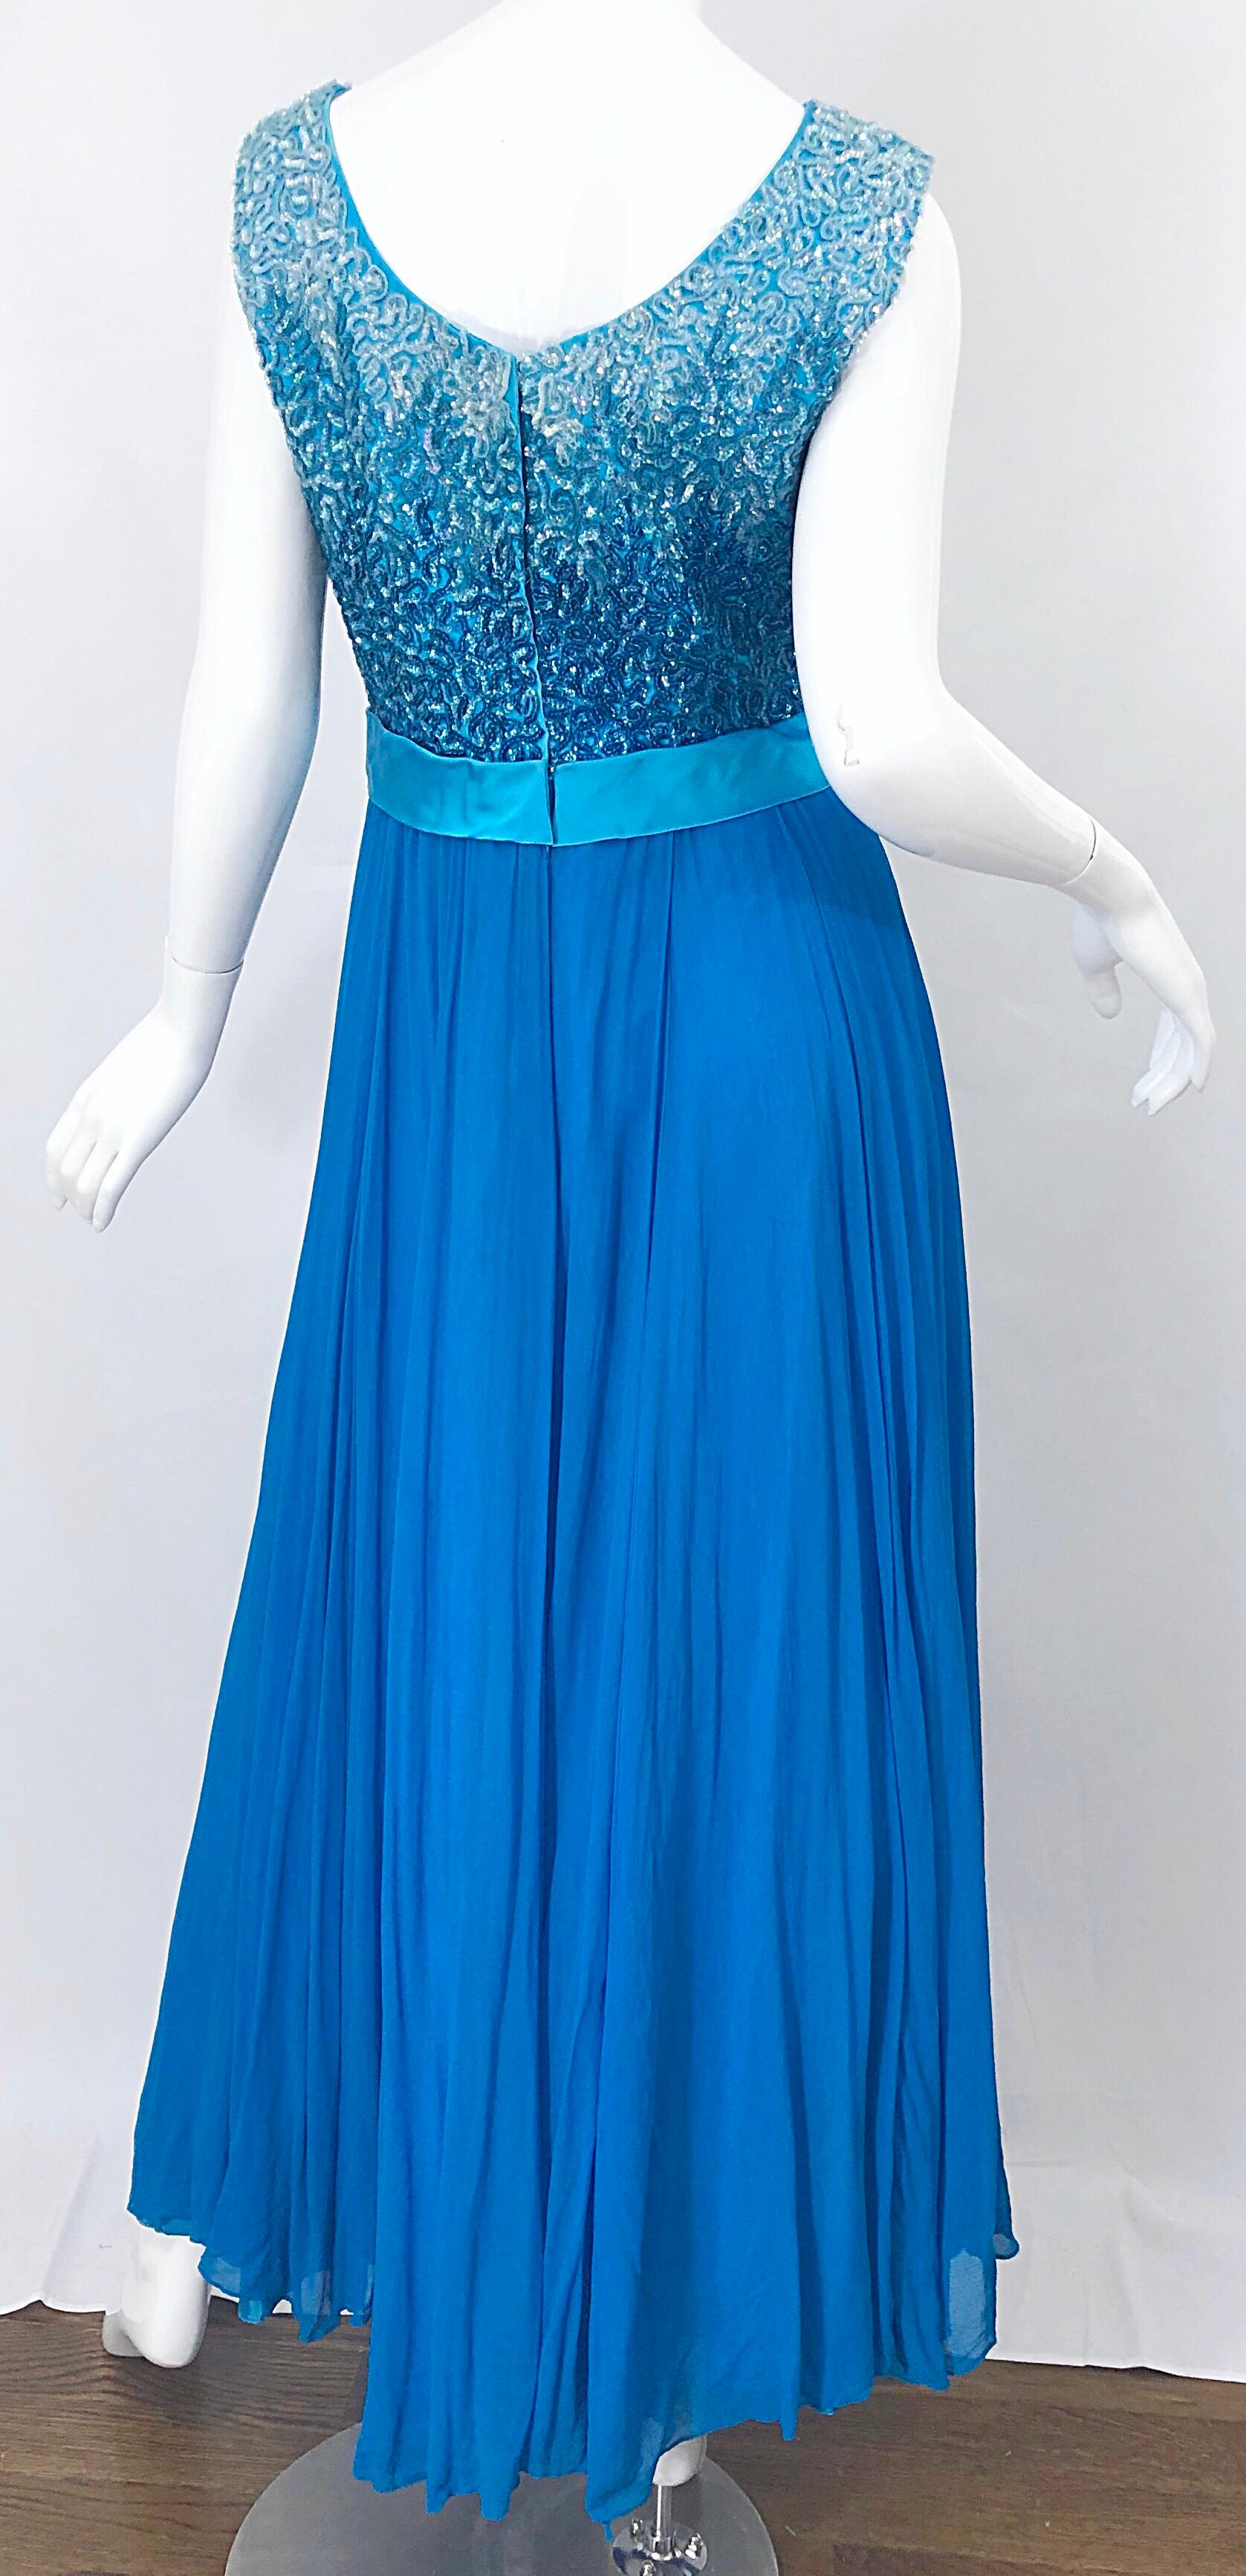 1960s Emma Domb Turquoise Blue Ombre Sequined Silk Chiffon Vintage 60s Gown For Sale 5